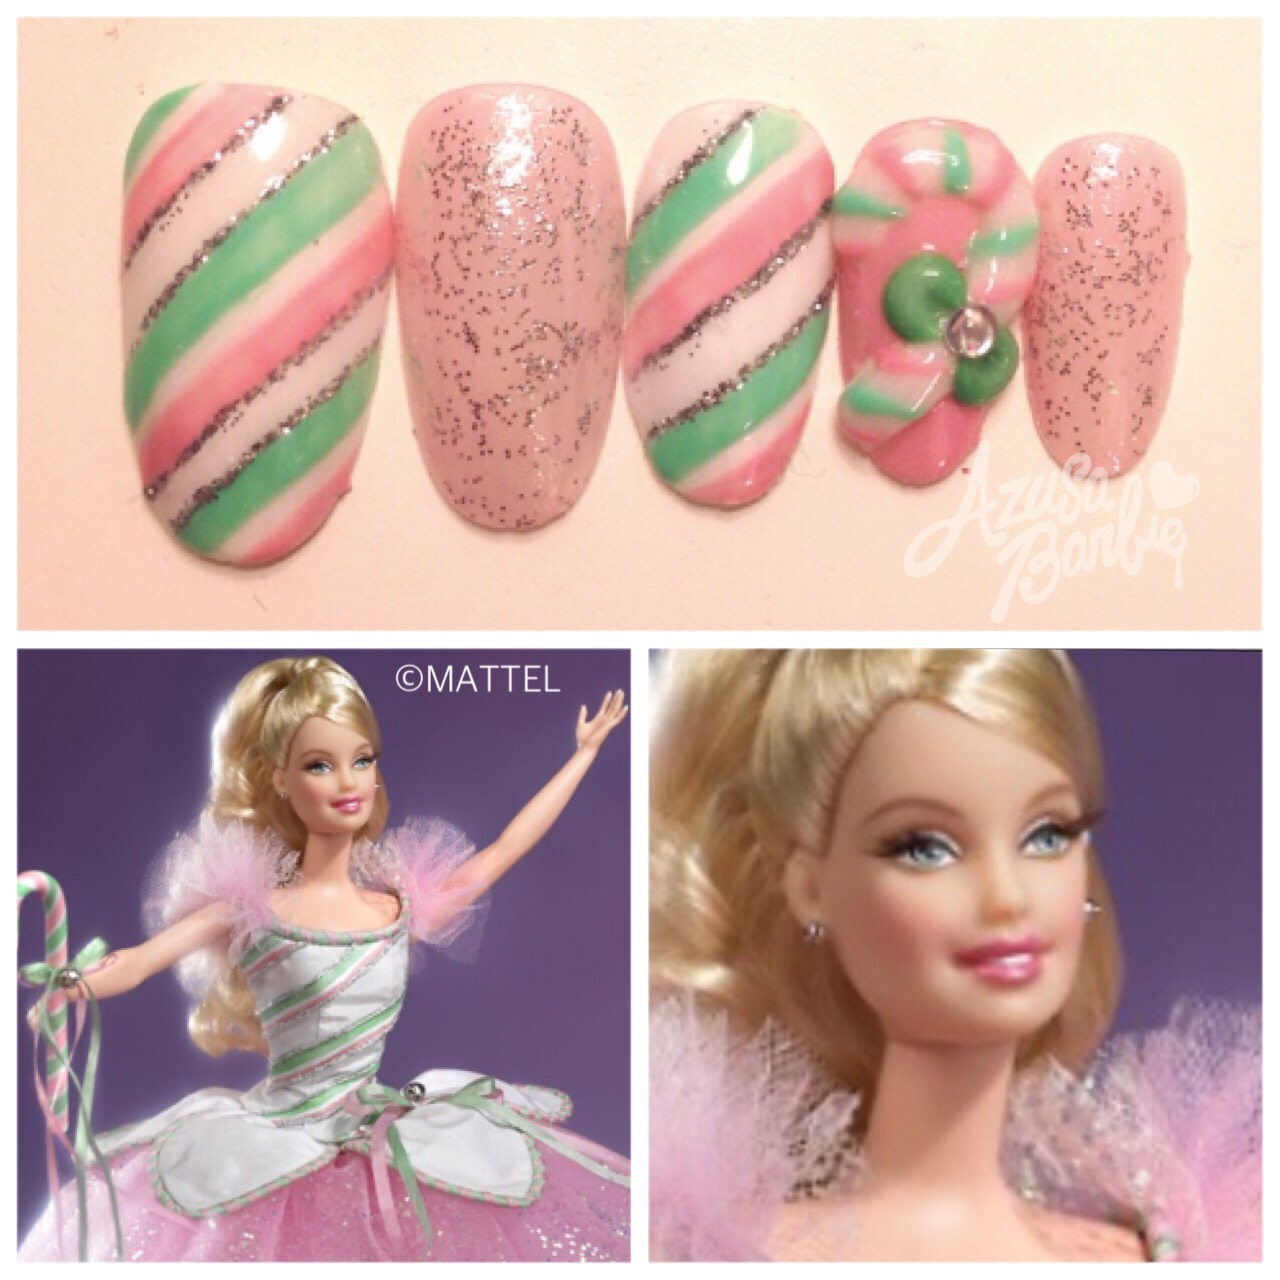 peppermint candy cane barbie